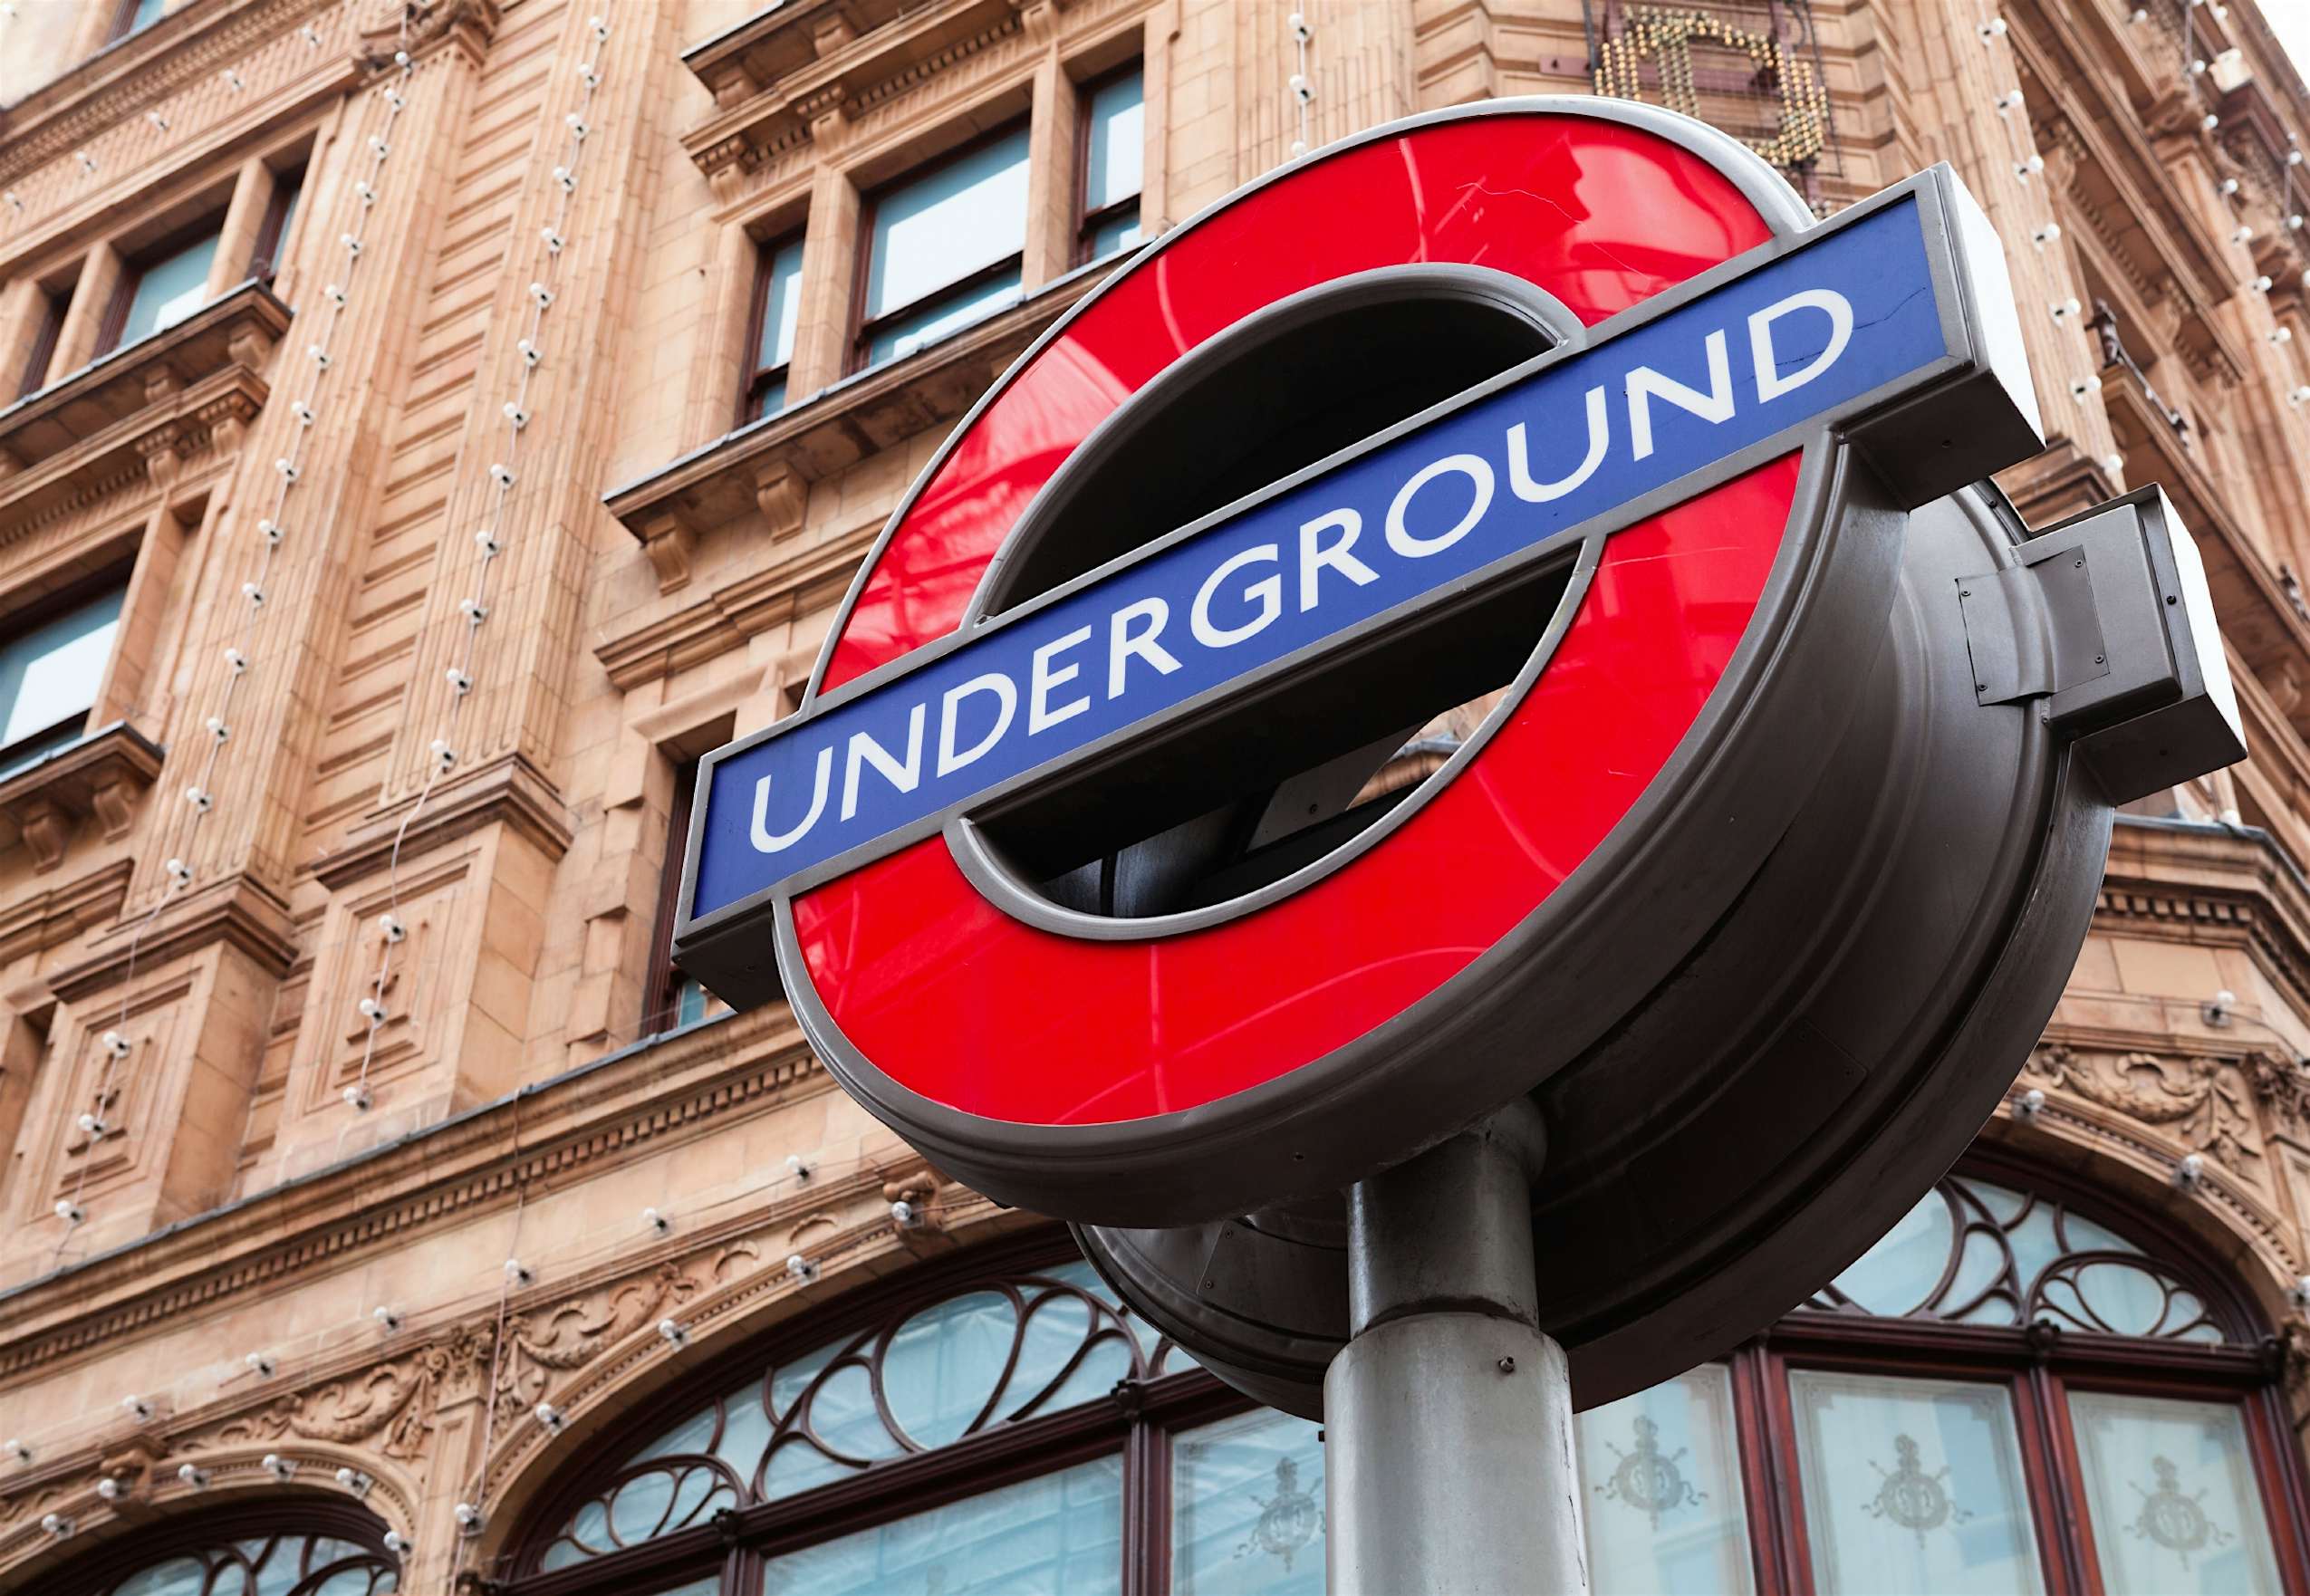 the-london-underground-s-logo-is-getting-a-new-look